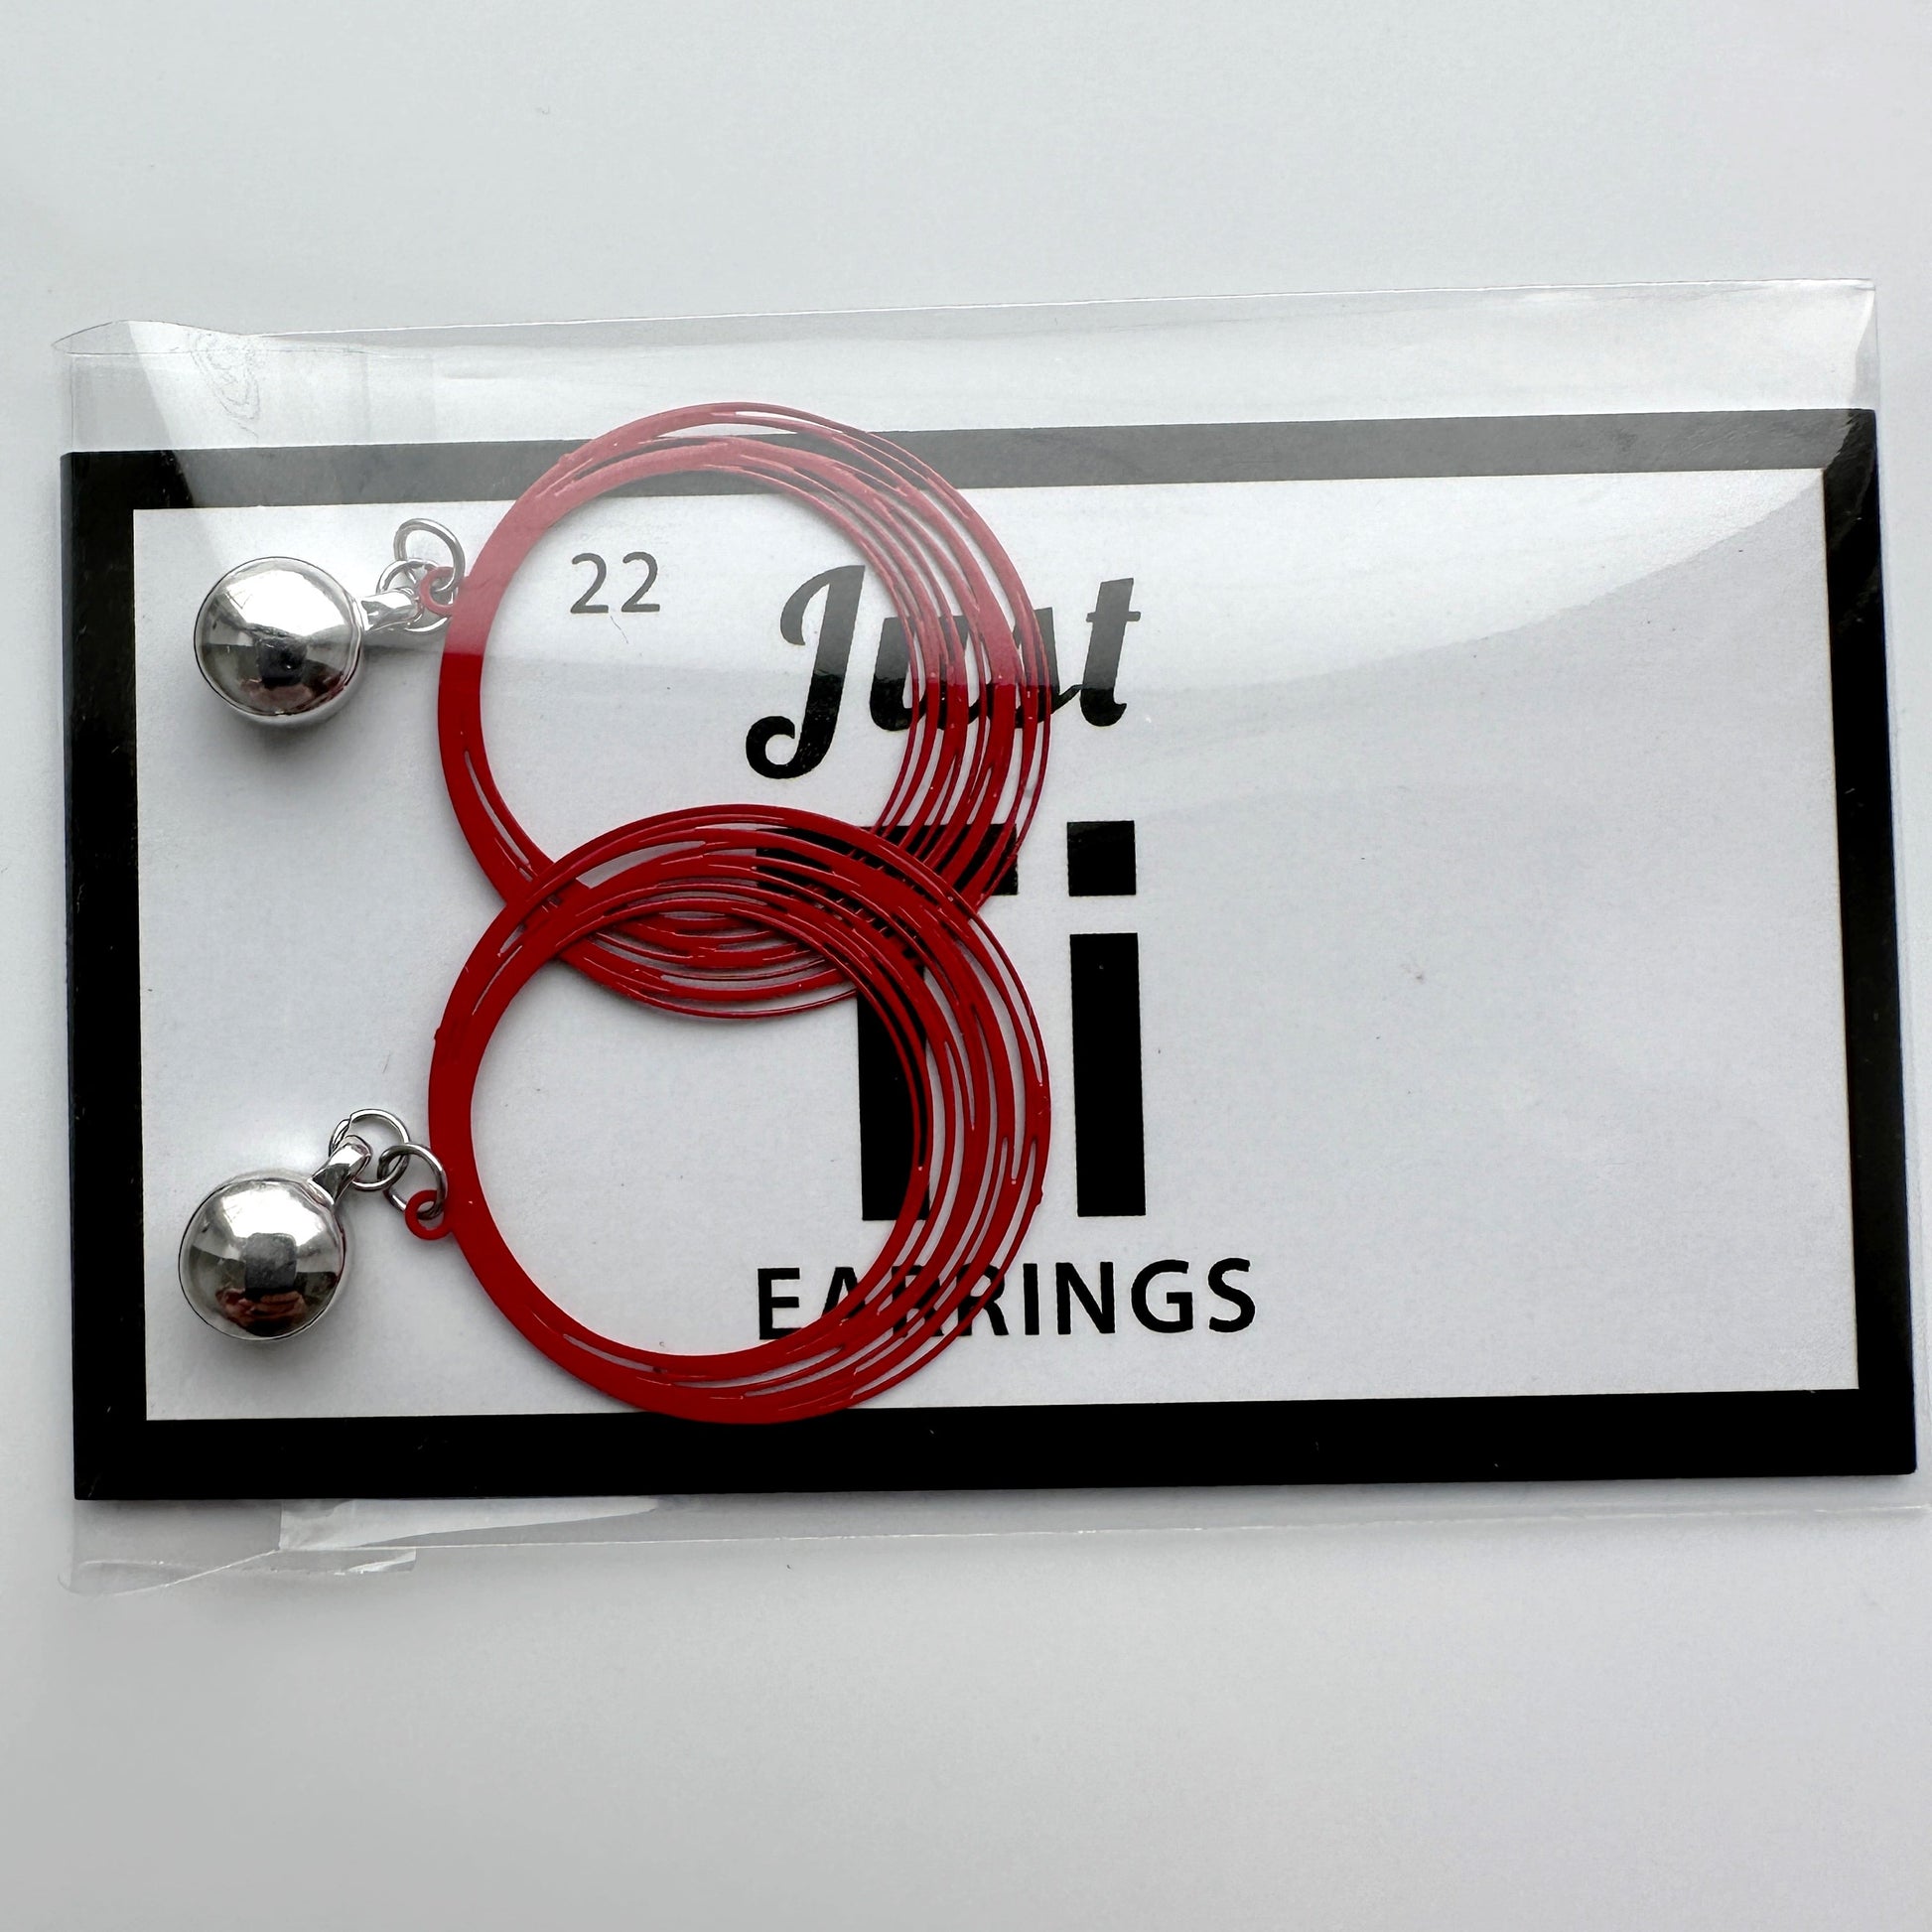 TI-GO Black / Red String Rings earring. Magnetic titanium interchangeable earring system. Detachable earrings for a truly hypoallergenic jewellery on a white card